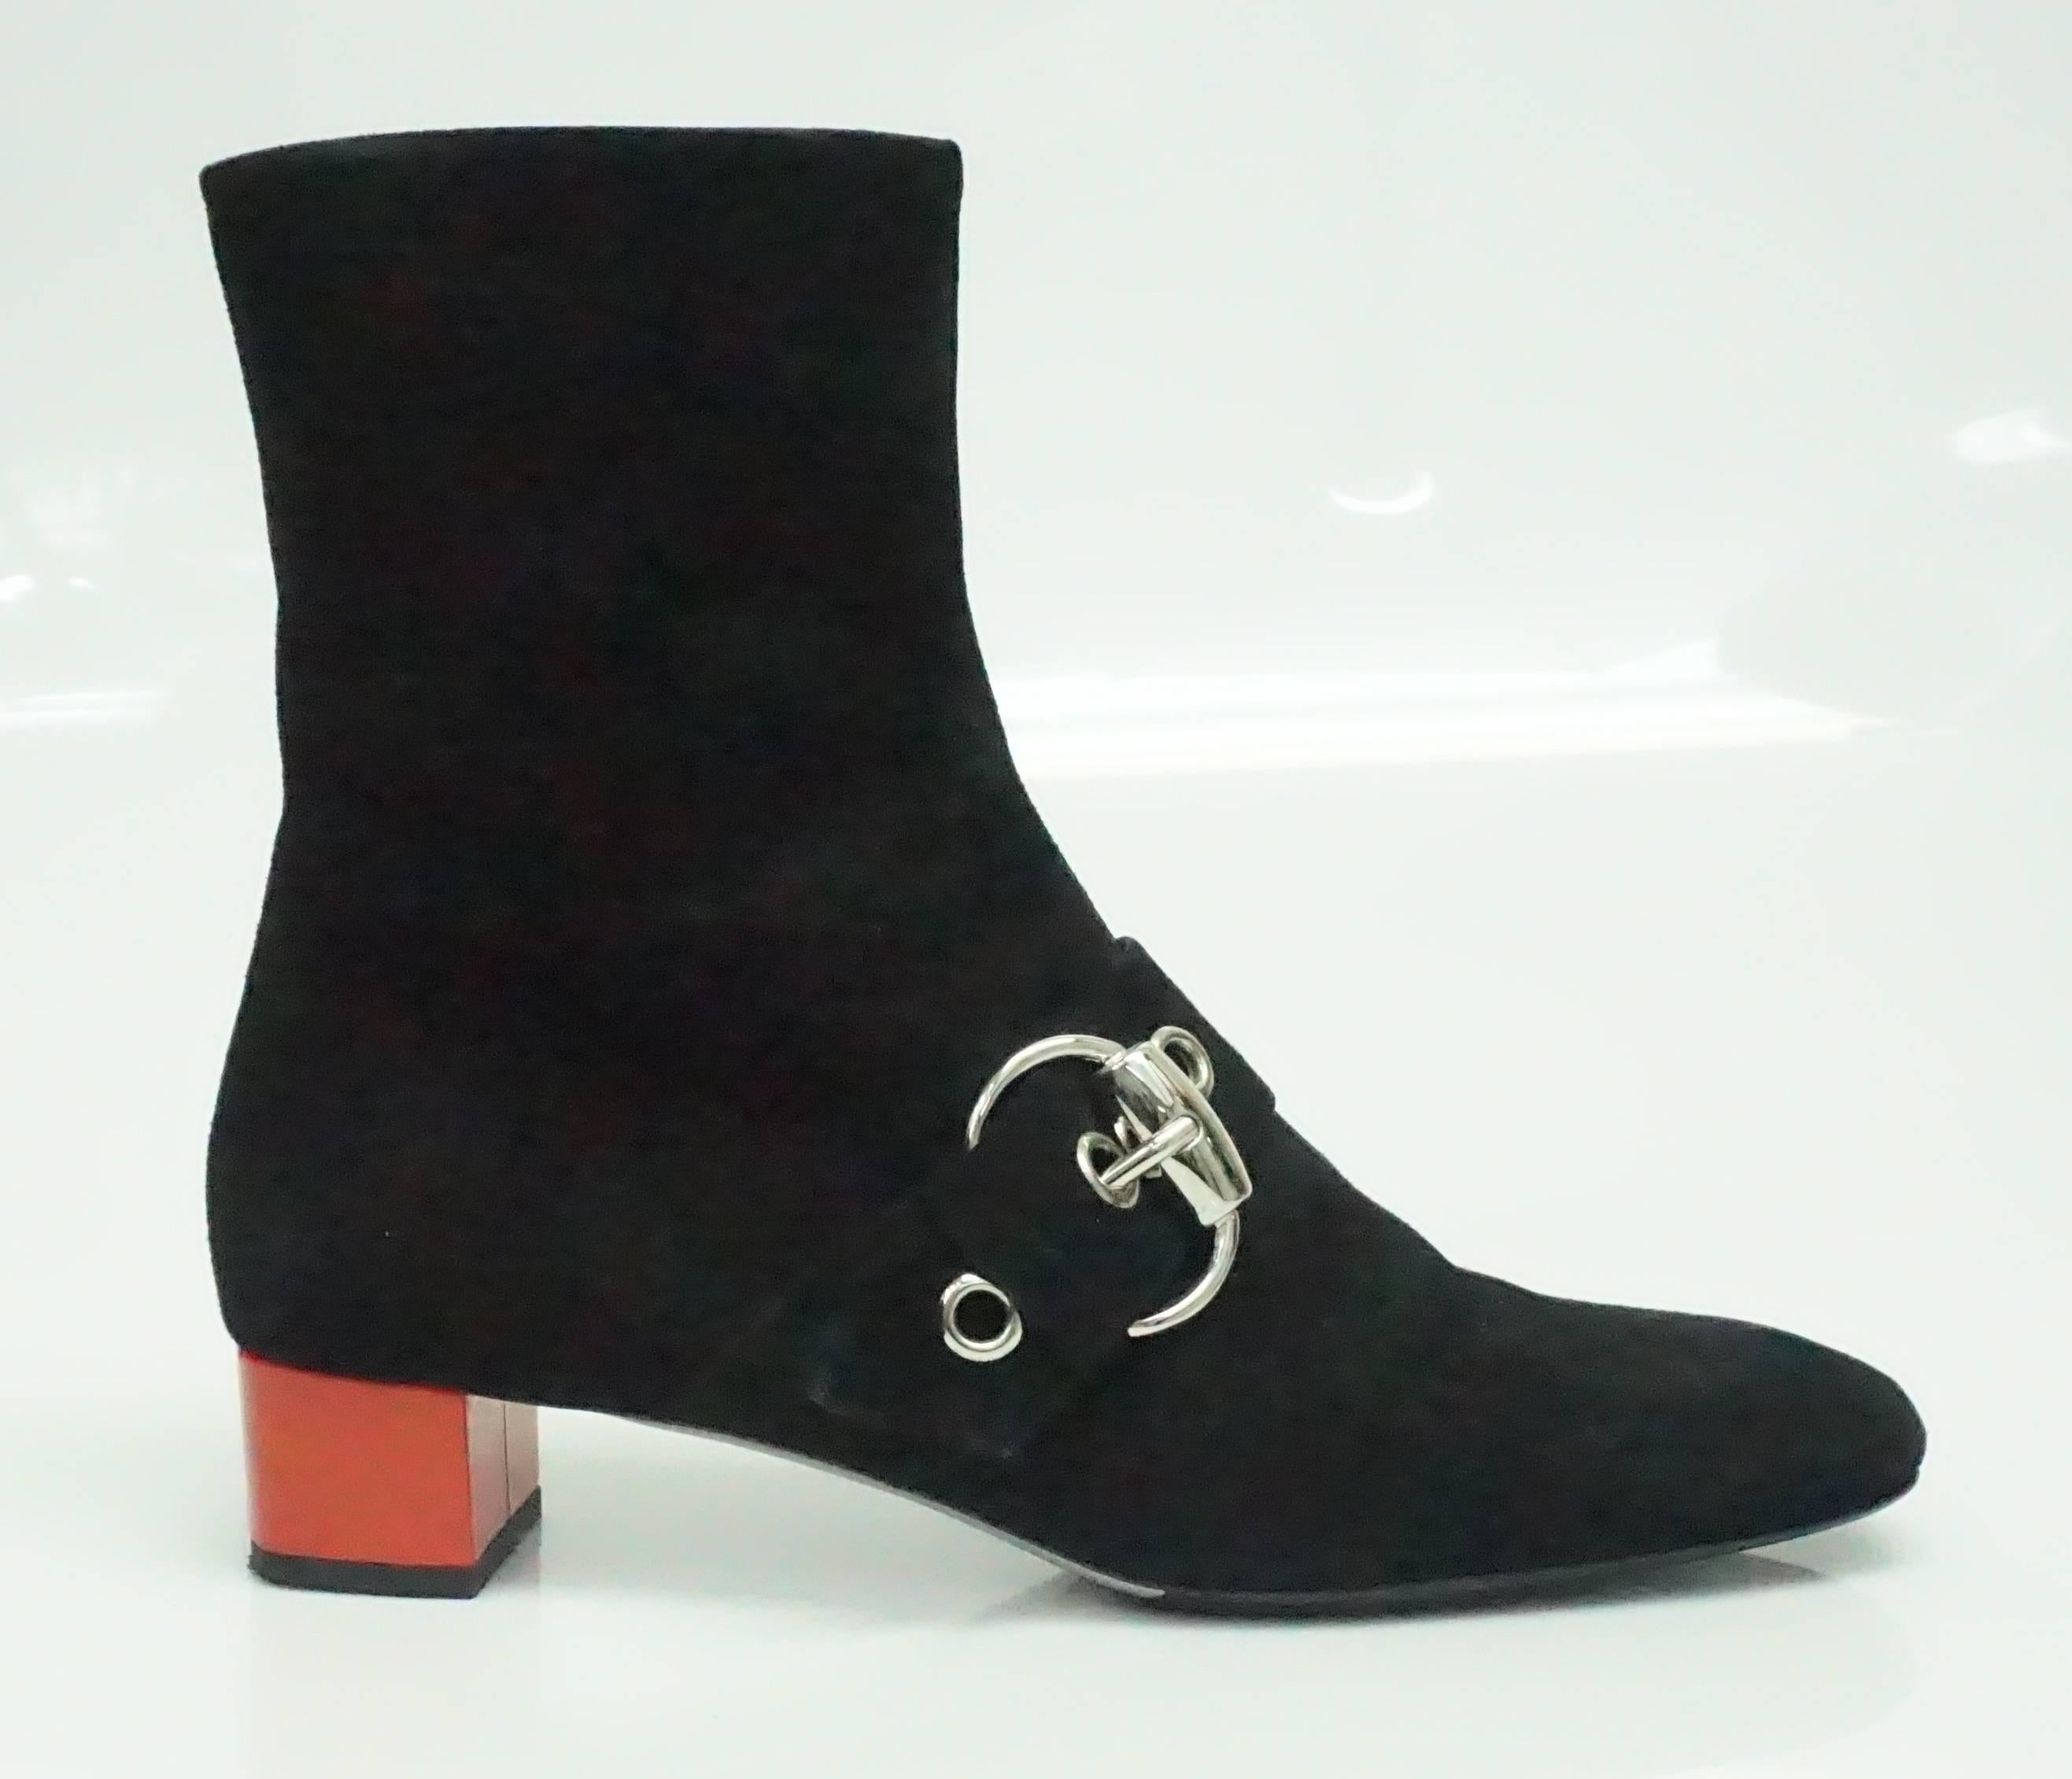 Gucci Black Suede Short Boot with Red Patent Chunky Heel - SHW - 39C  This is truly one of my favorite Gucci Boots I have seen. The black suede boot  has a somewhat rounded toe, a strap that comes across the is accented by a silver buckle and